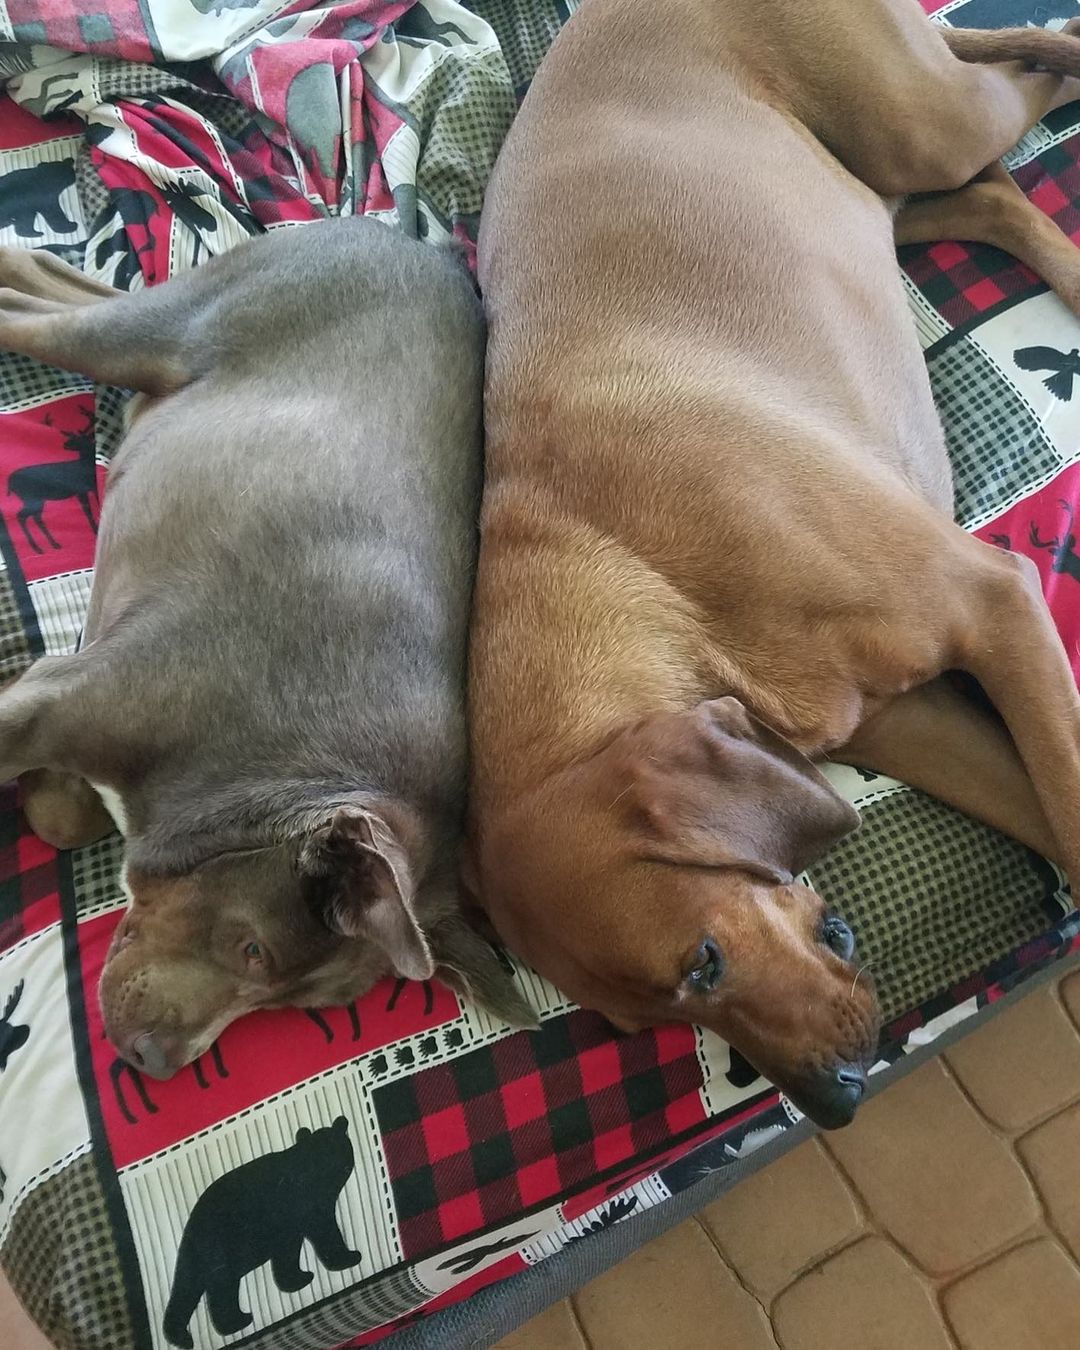 two dogs laying together